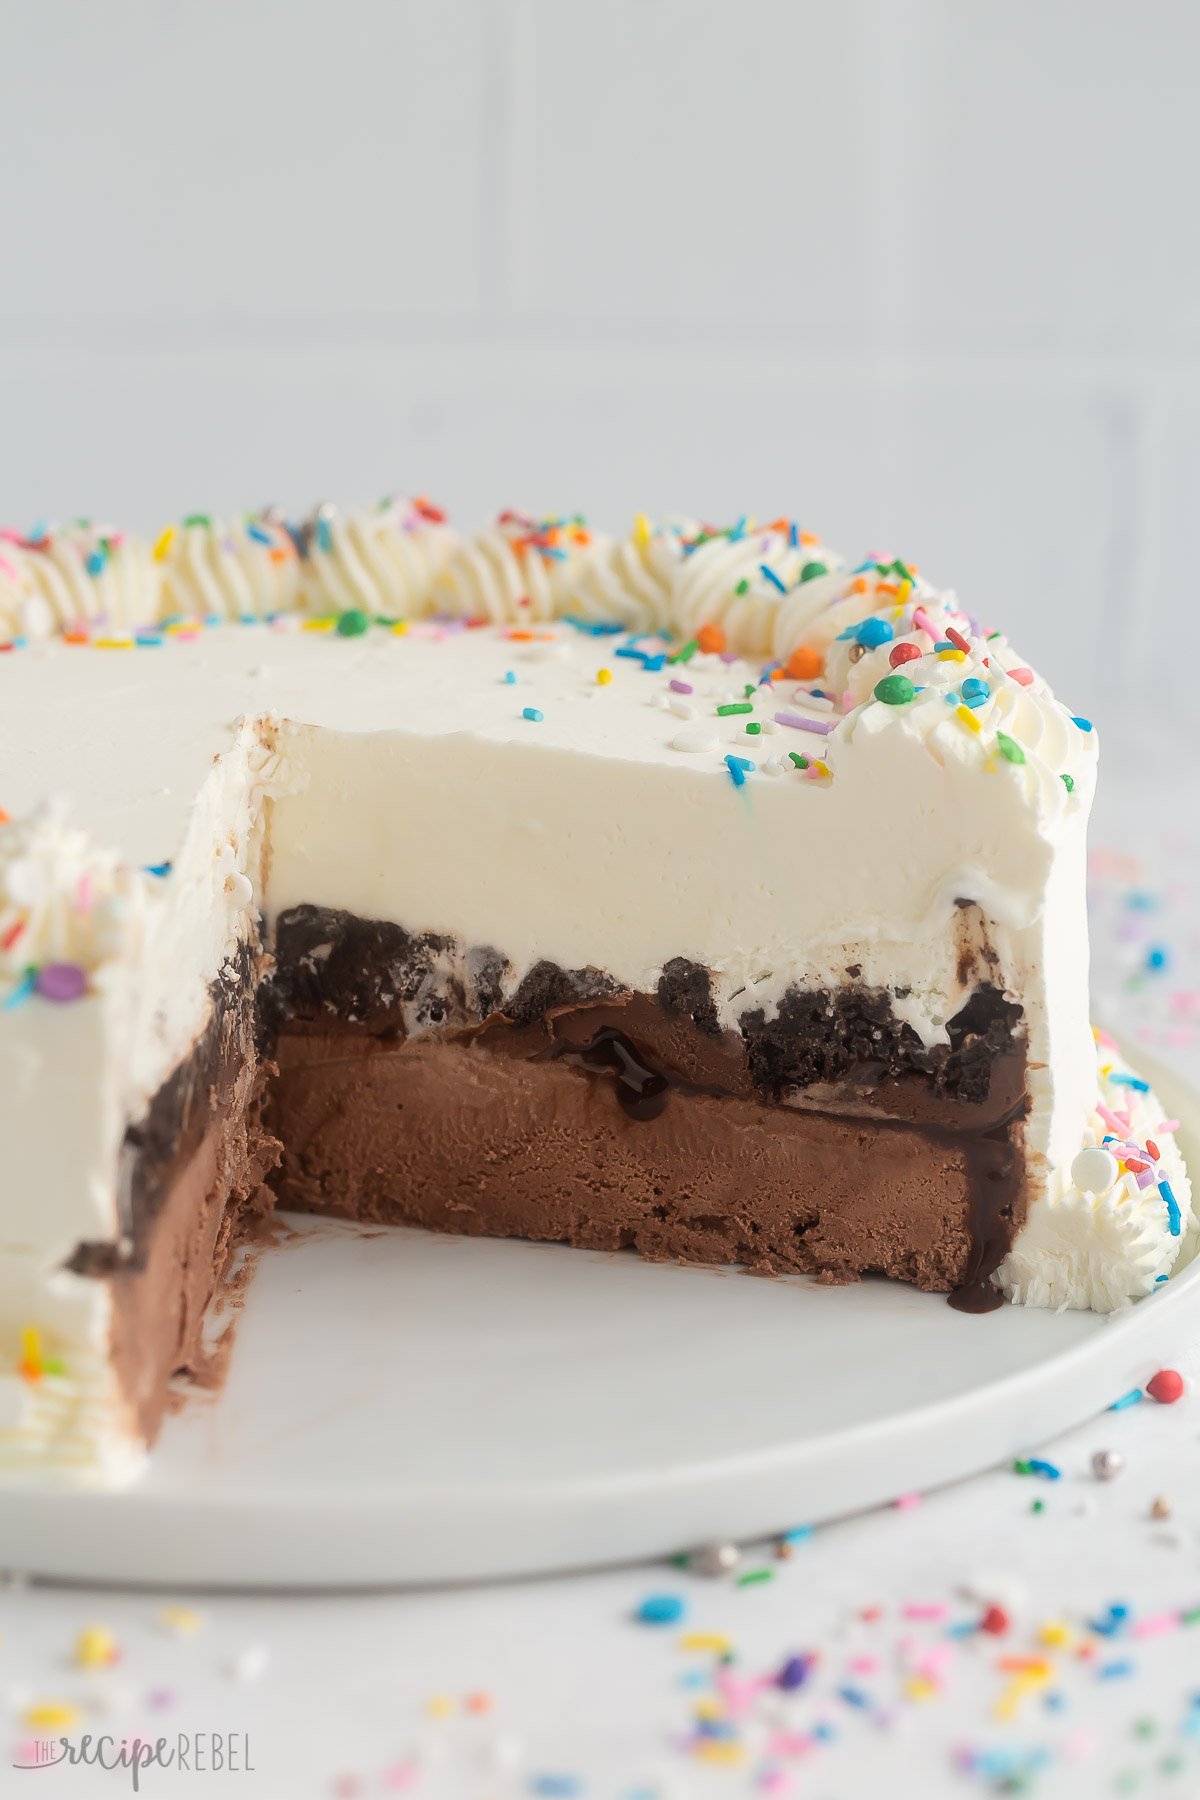 inside look at a homemade dairy queen ice cream cake recipe.